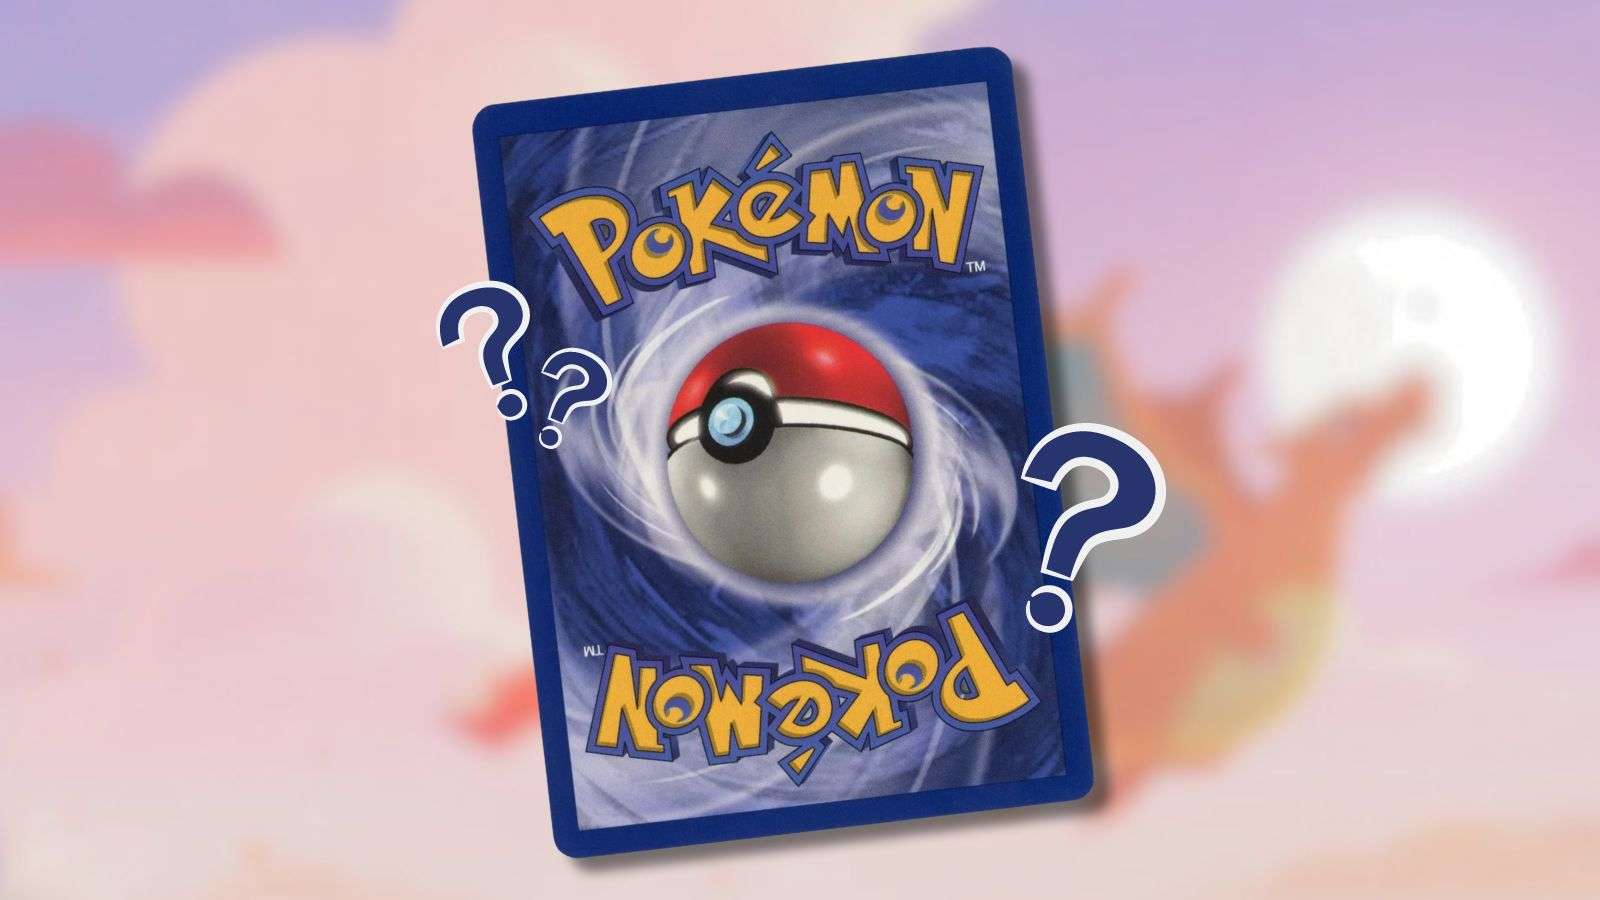 Pokemon card with question marks and Charizard background.